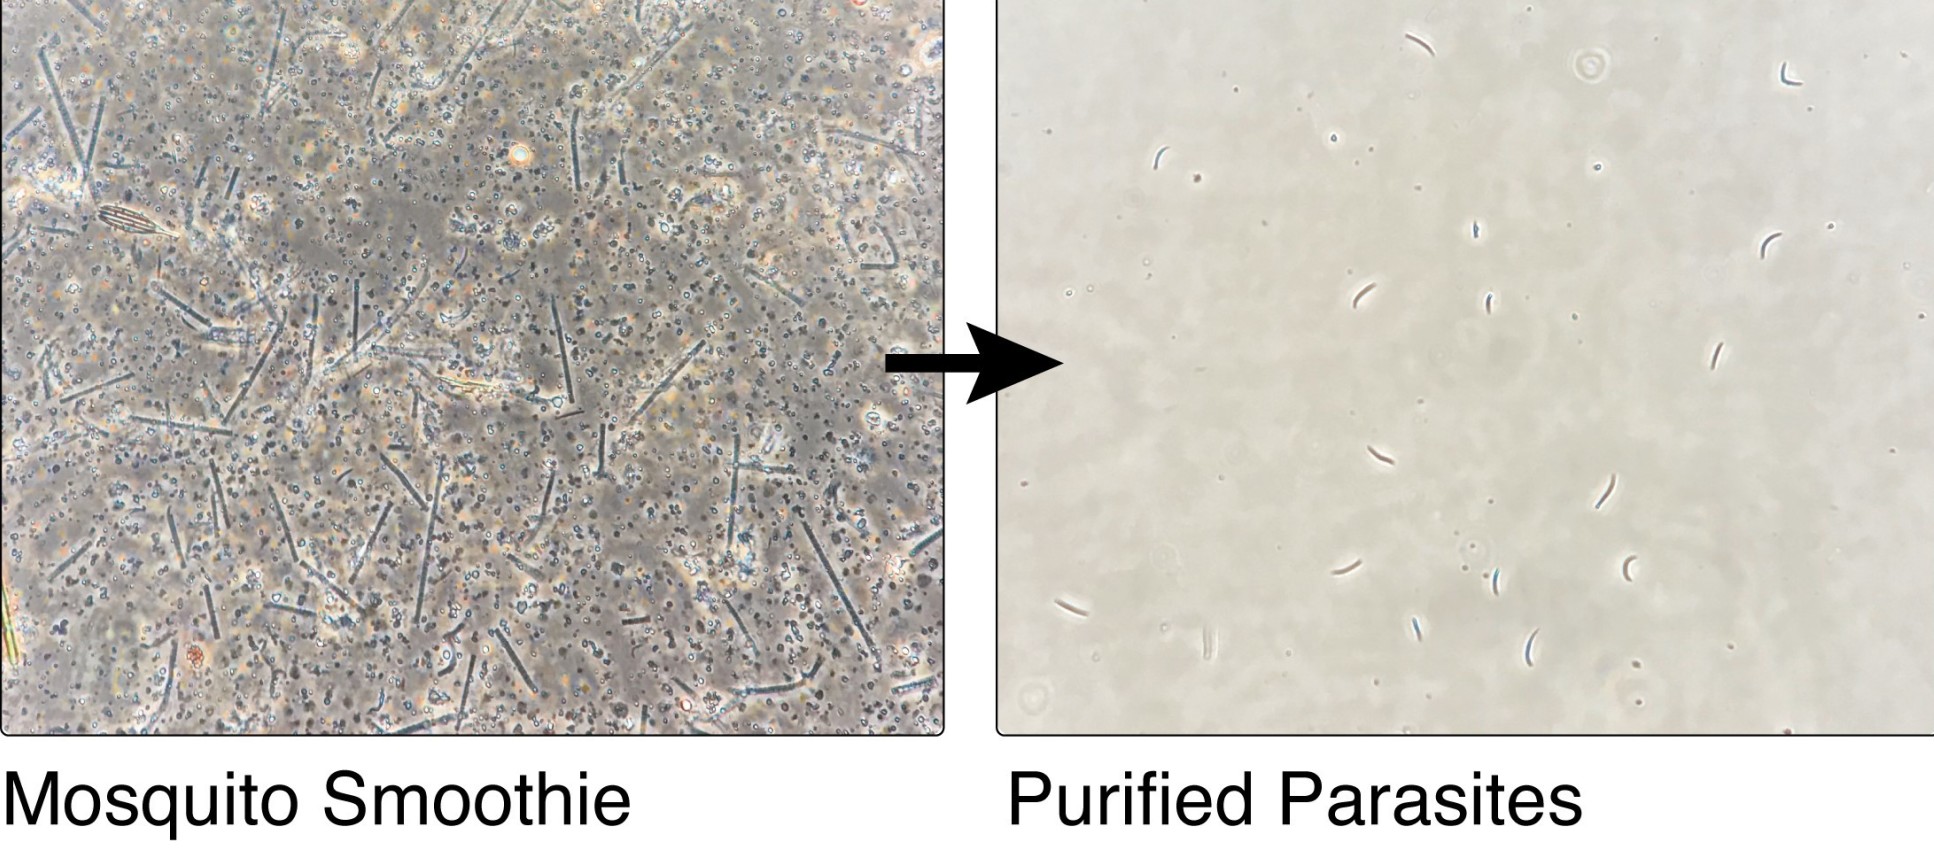 Two microscope images showing the 'mosquito smoothie' mess of particles and the purified parasites after it ahs been through the team's process